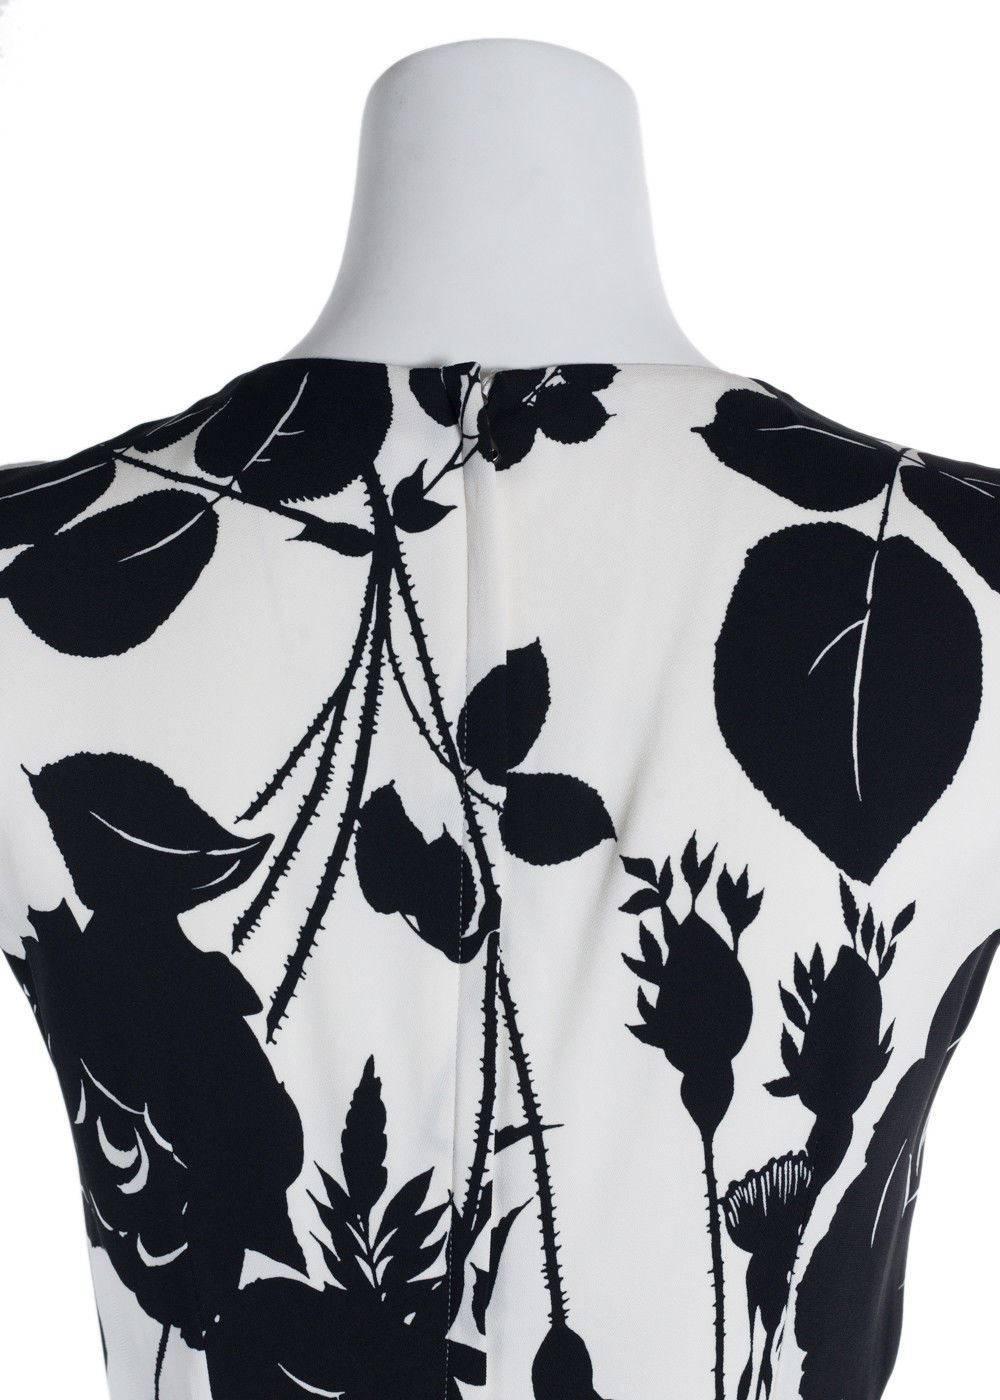 Women's Dolce & Gabbana Black and White Floral Embroidered Sleeveless Dress